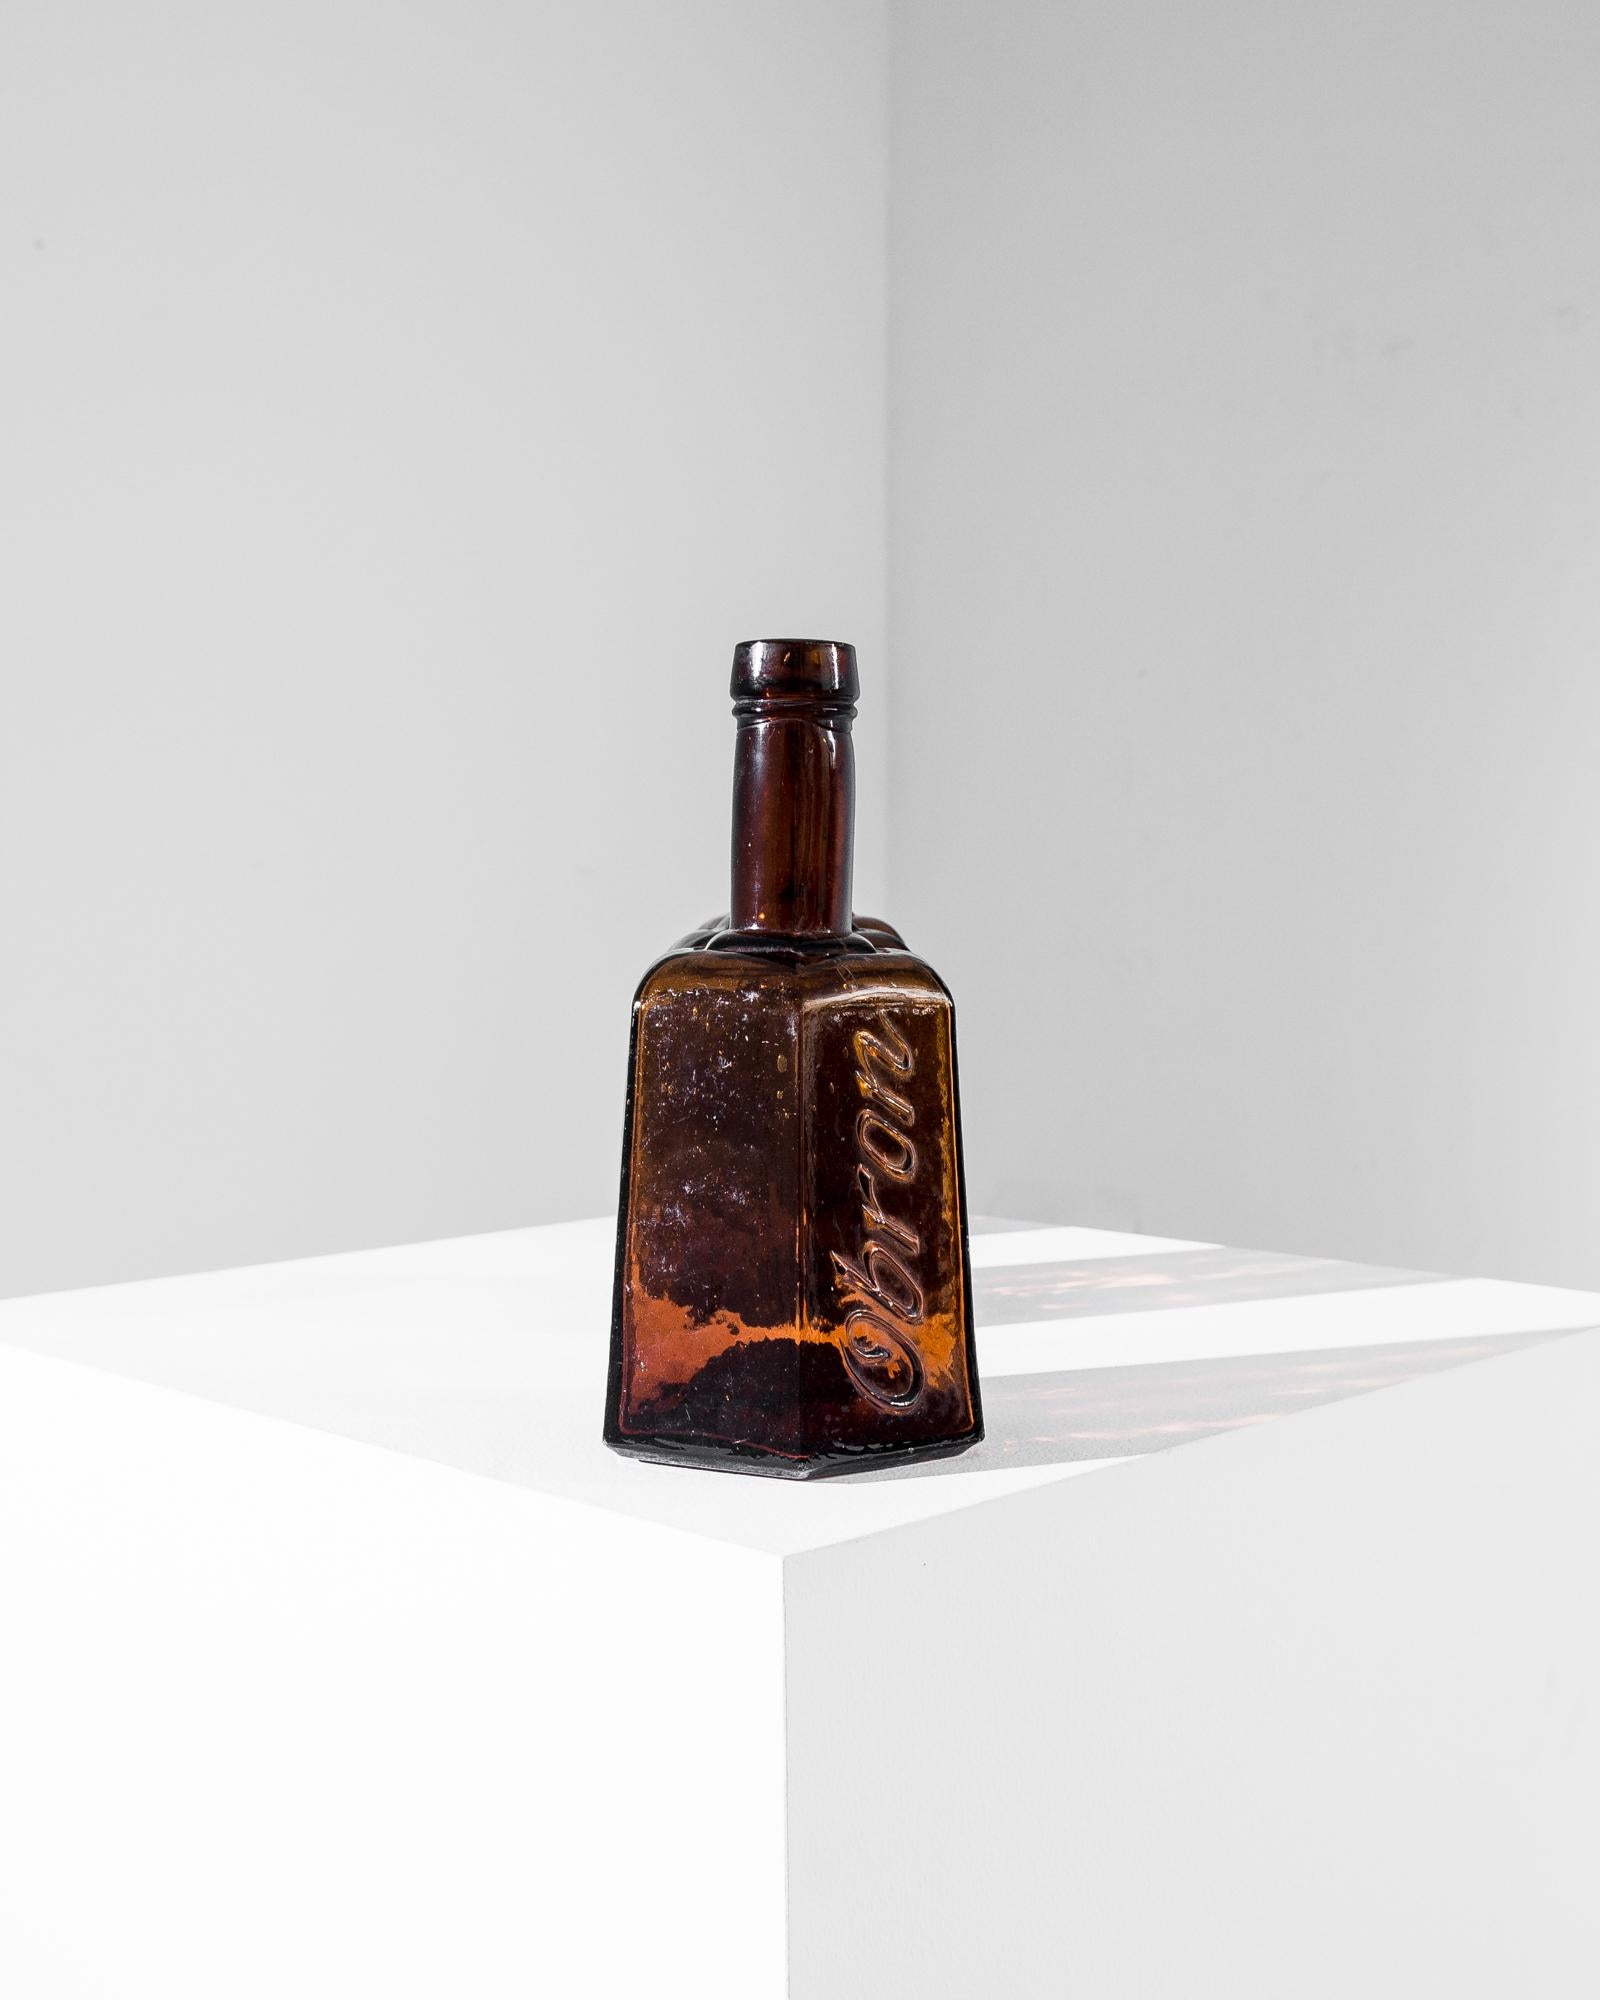 A vintage glass bottle from Europe, produced around 1900. Originally containing concentrated bouillon, the charming bottles were too beautiful to let go. Thick, light brown glass forms a hexagonal body embossed with the brand “Obron” under a long,